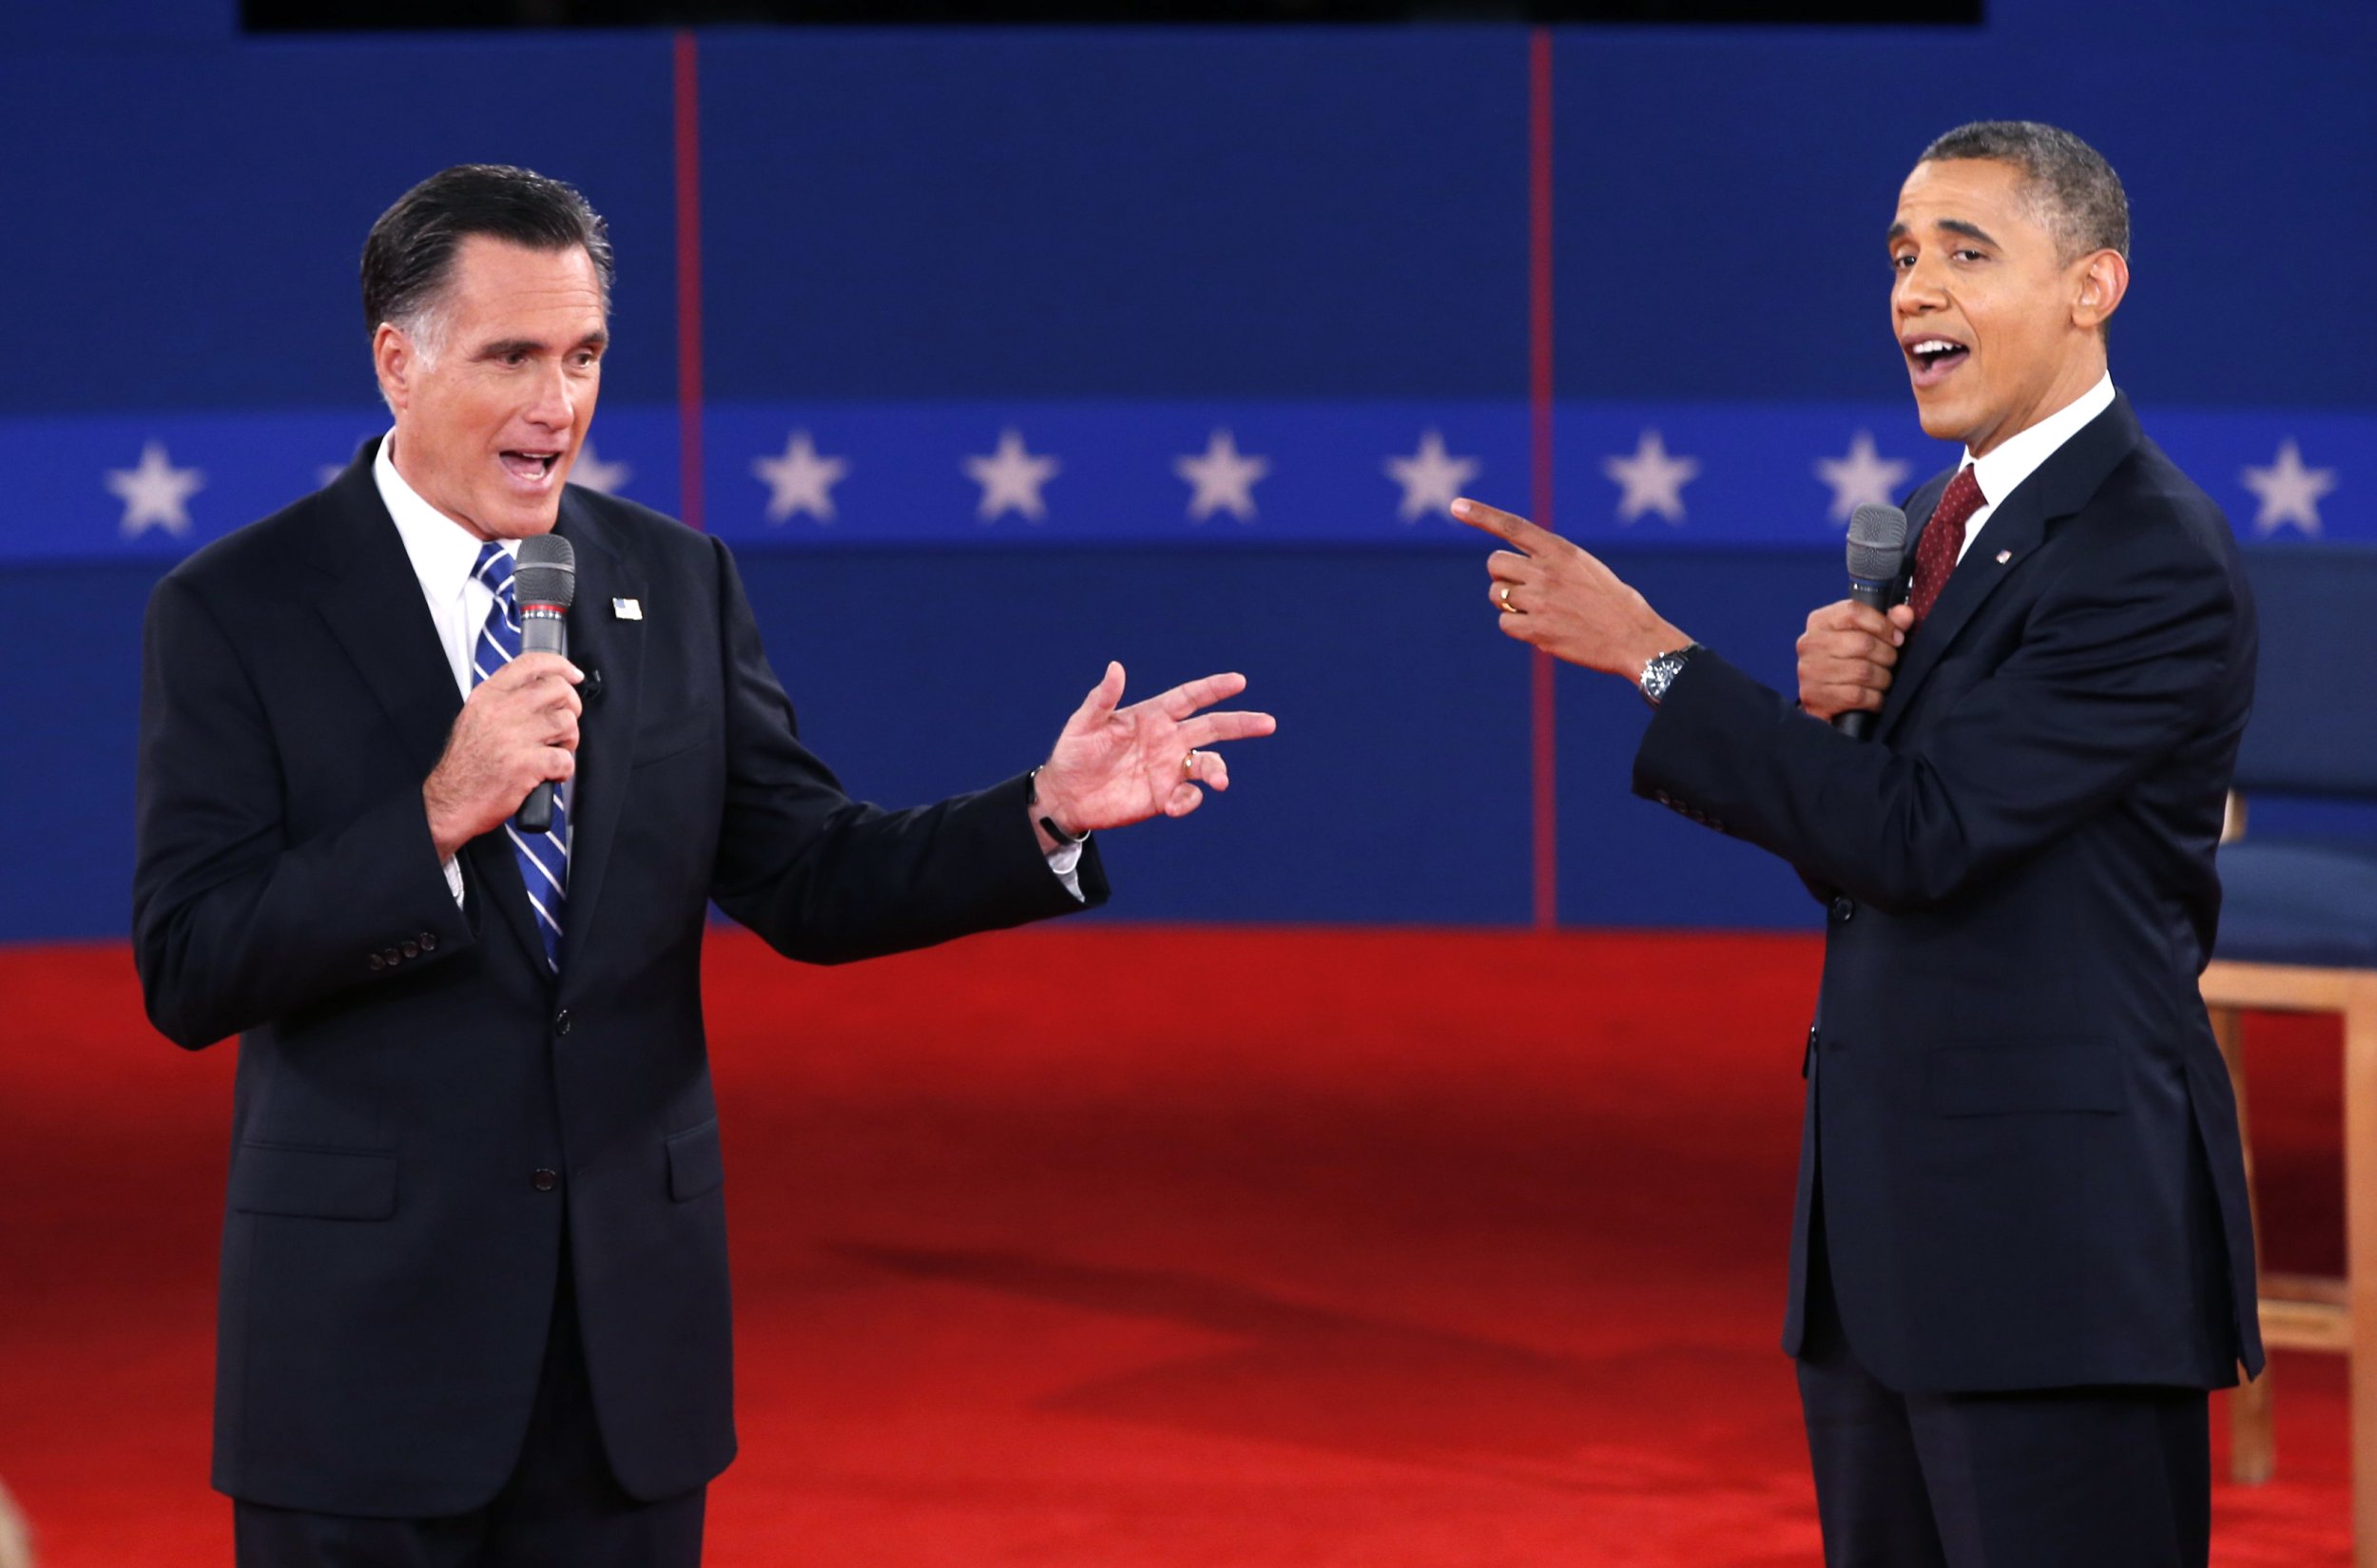 Debate Transcript And Full Video Available From Second 2012 Presidential Debate Ibtimes